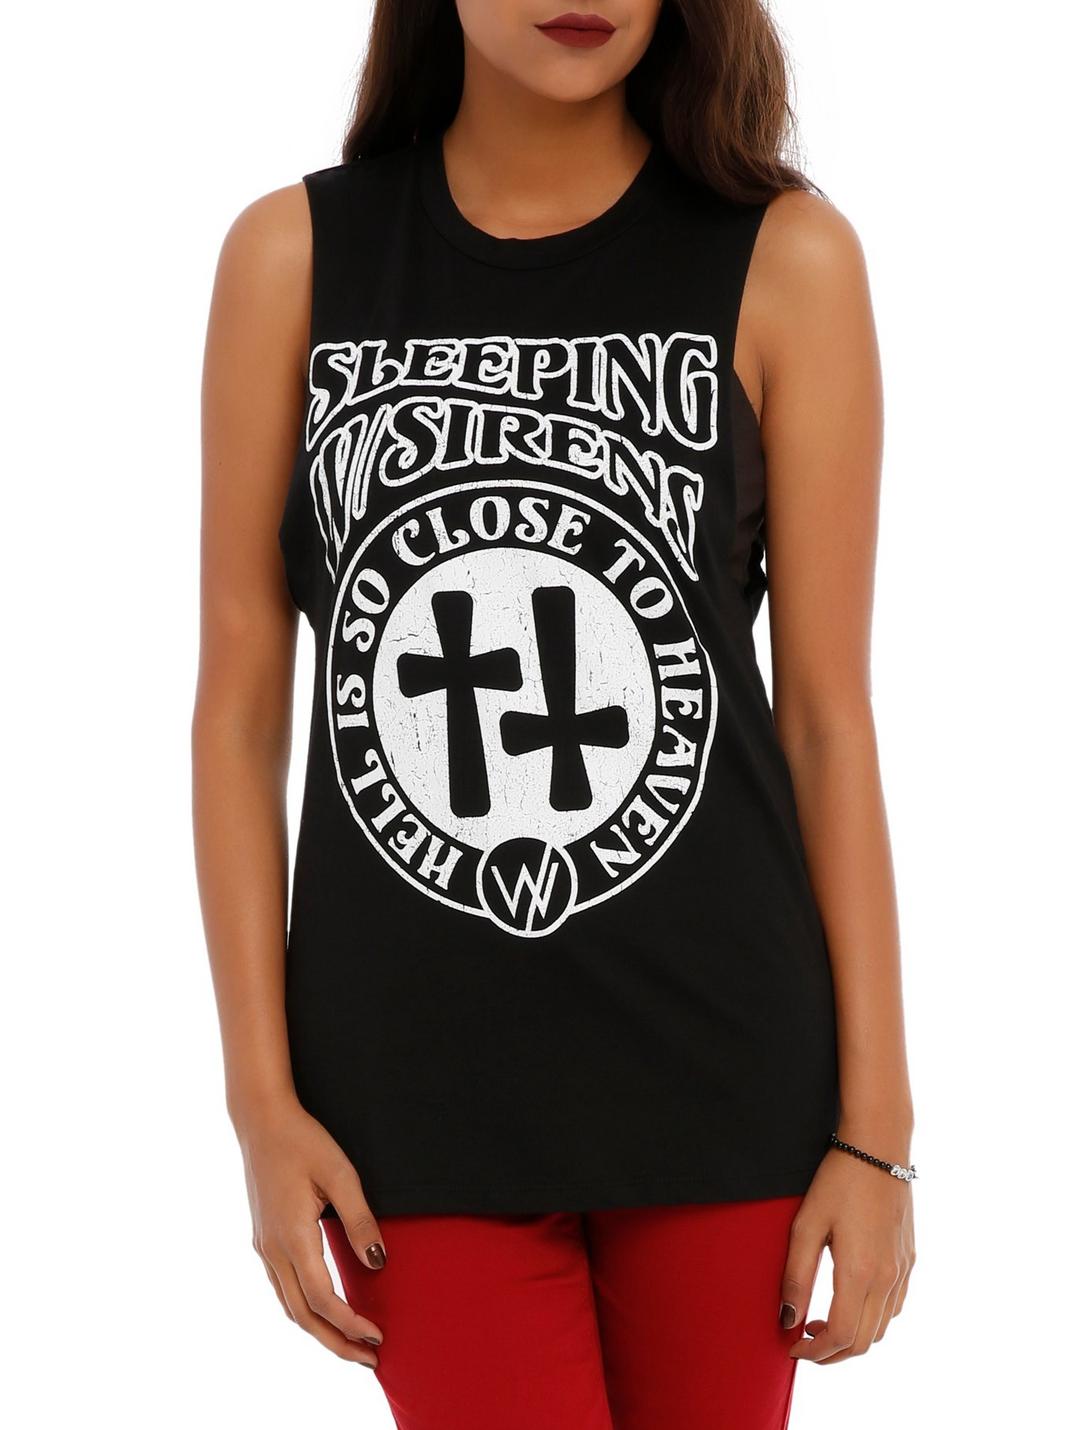 Sleeping With Sirens Hell Close To Heaven Girls Muscle Top, BLACK, hi-res